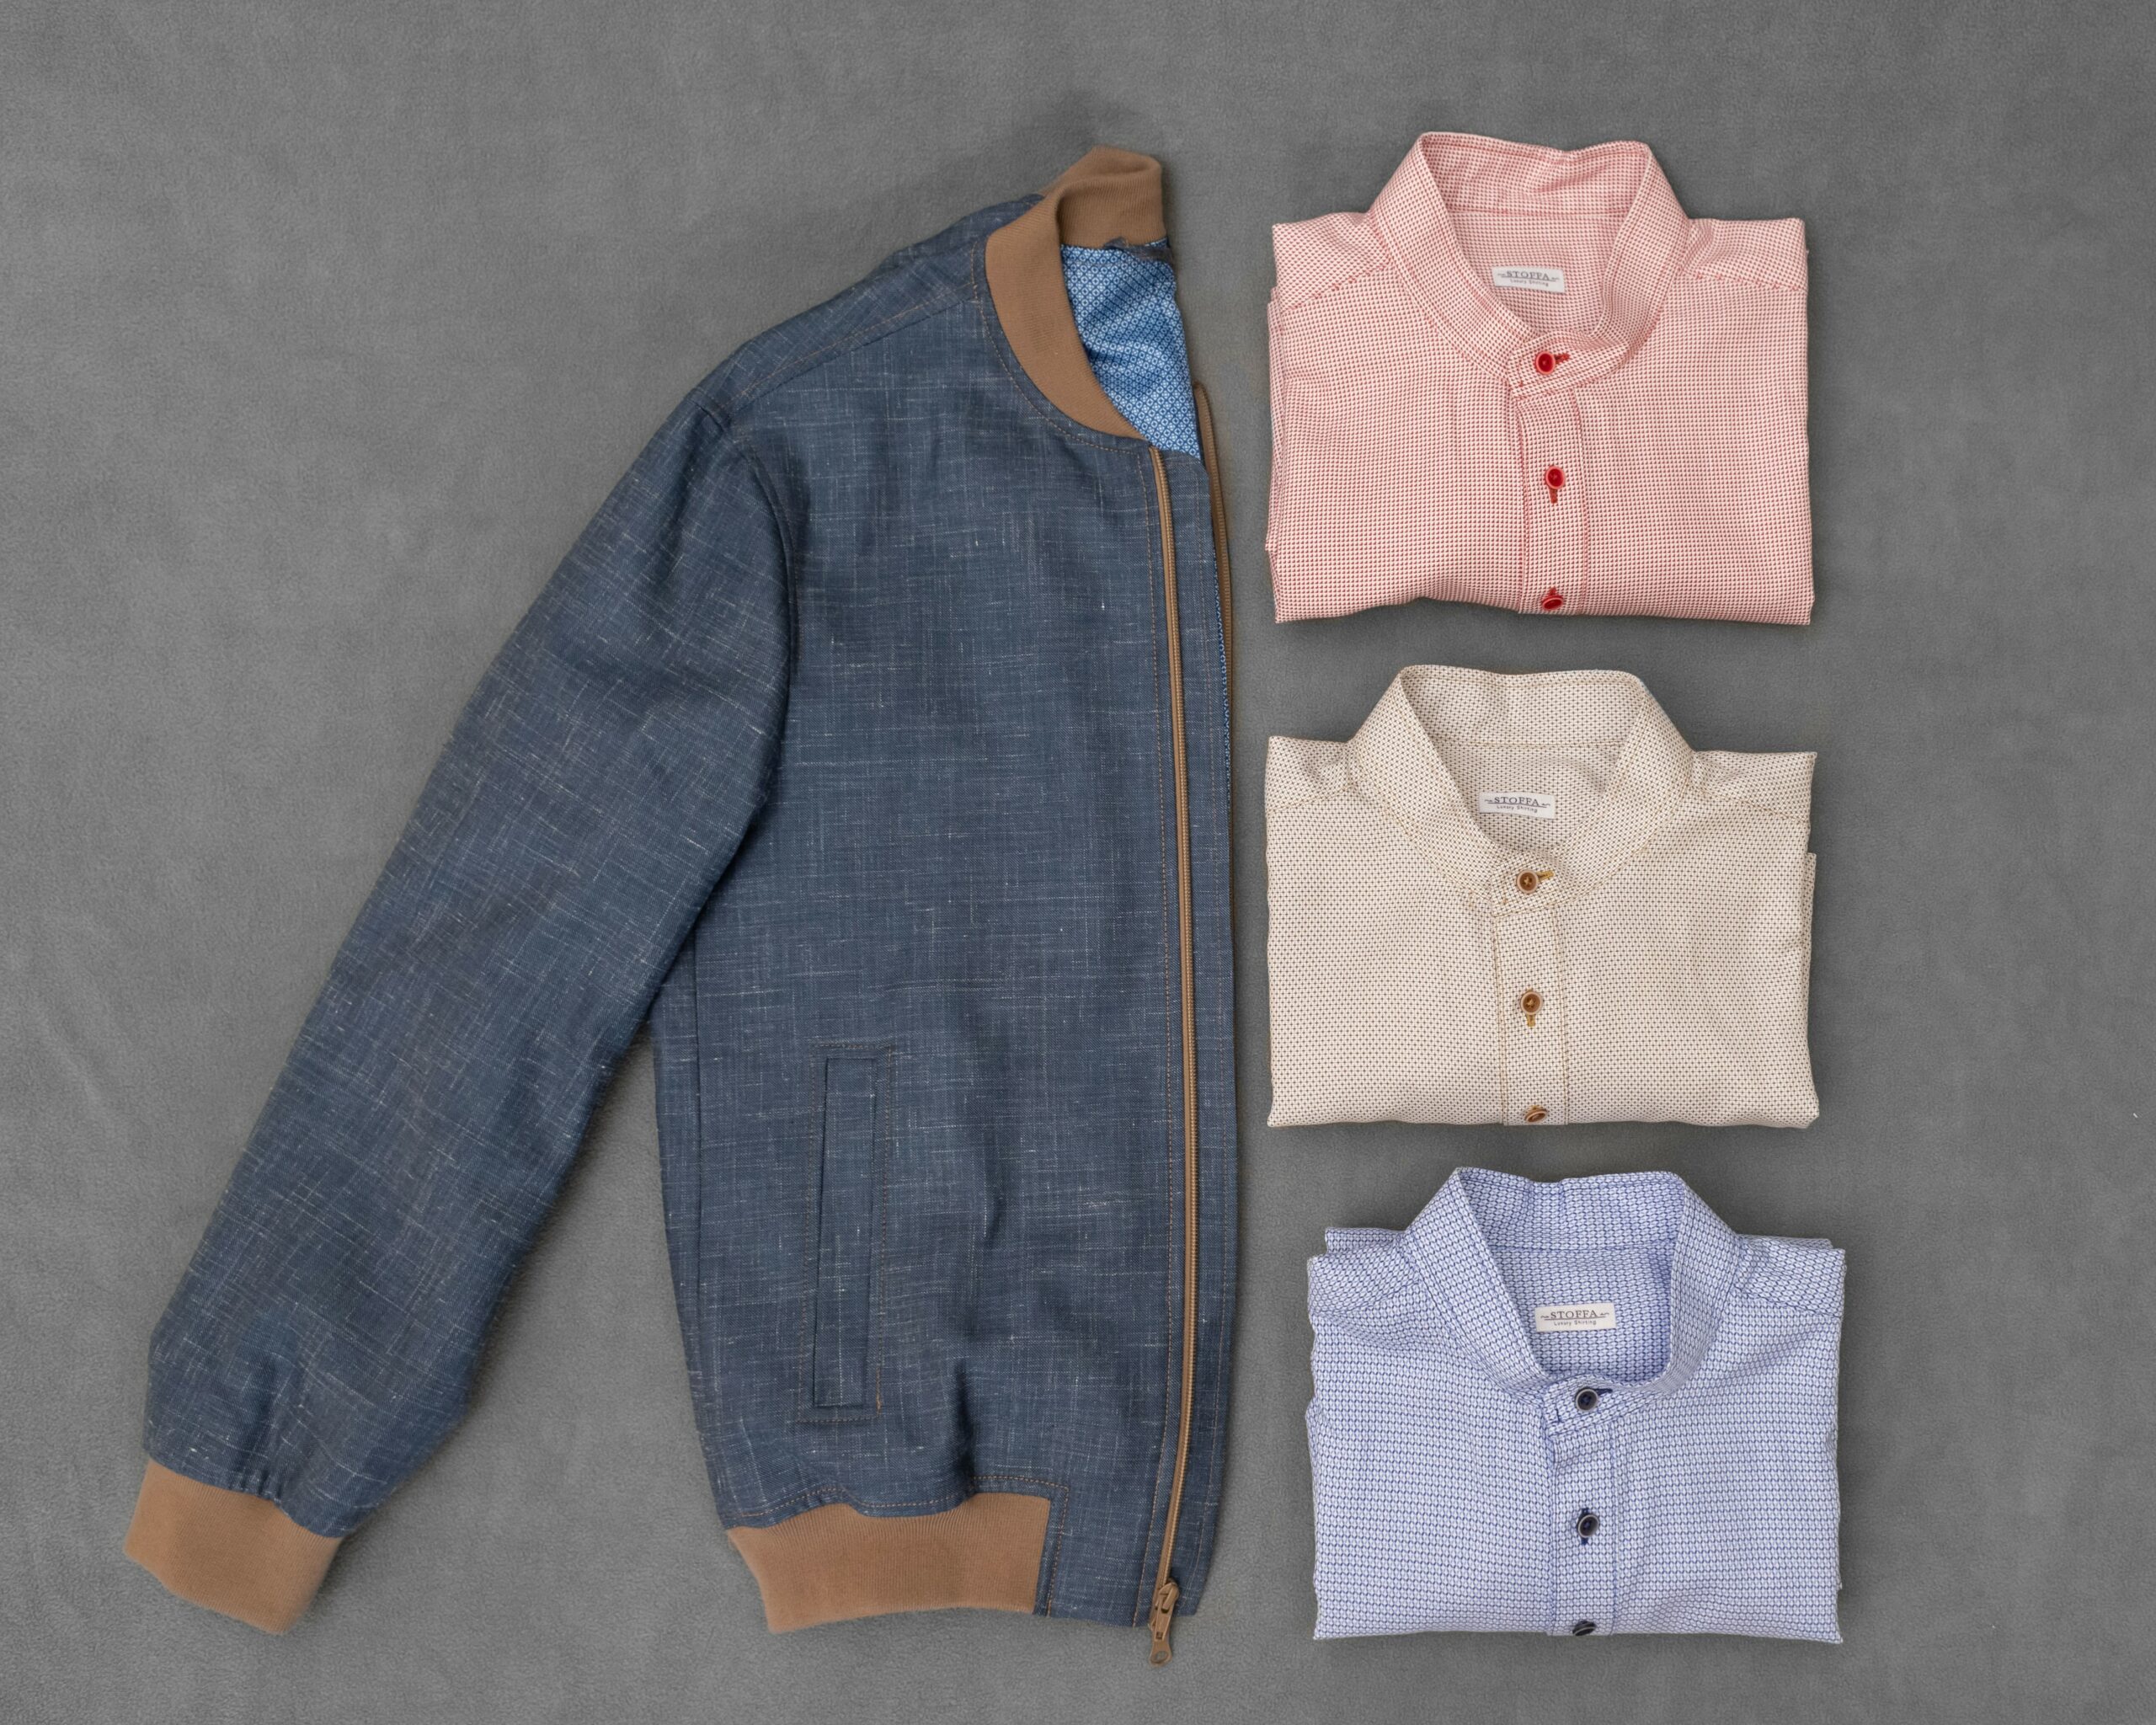 Wool Linen Custom Made Bomber Jacket pairs well with a variety of shirt colors and is a perfect layering piece for Spring and Summer